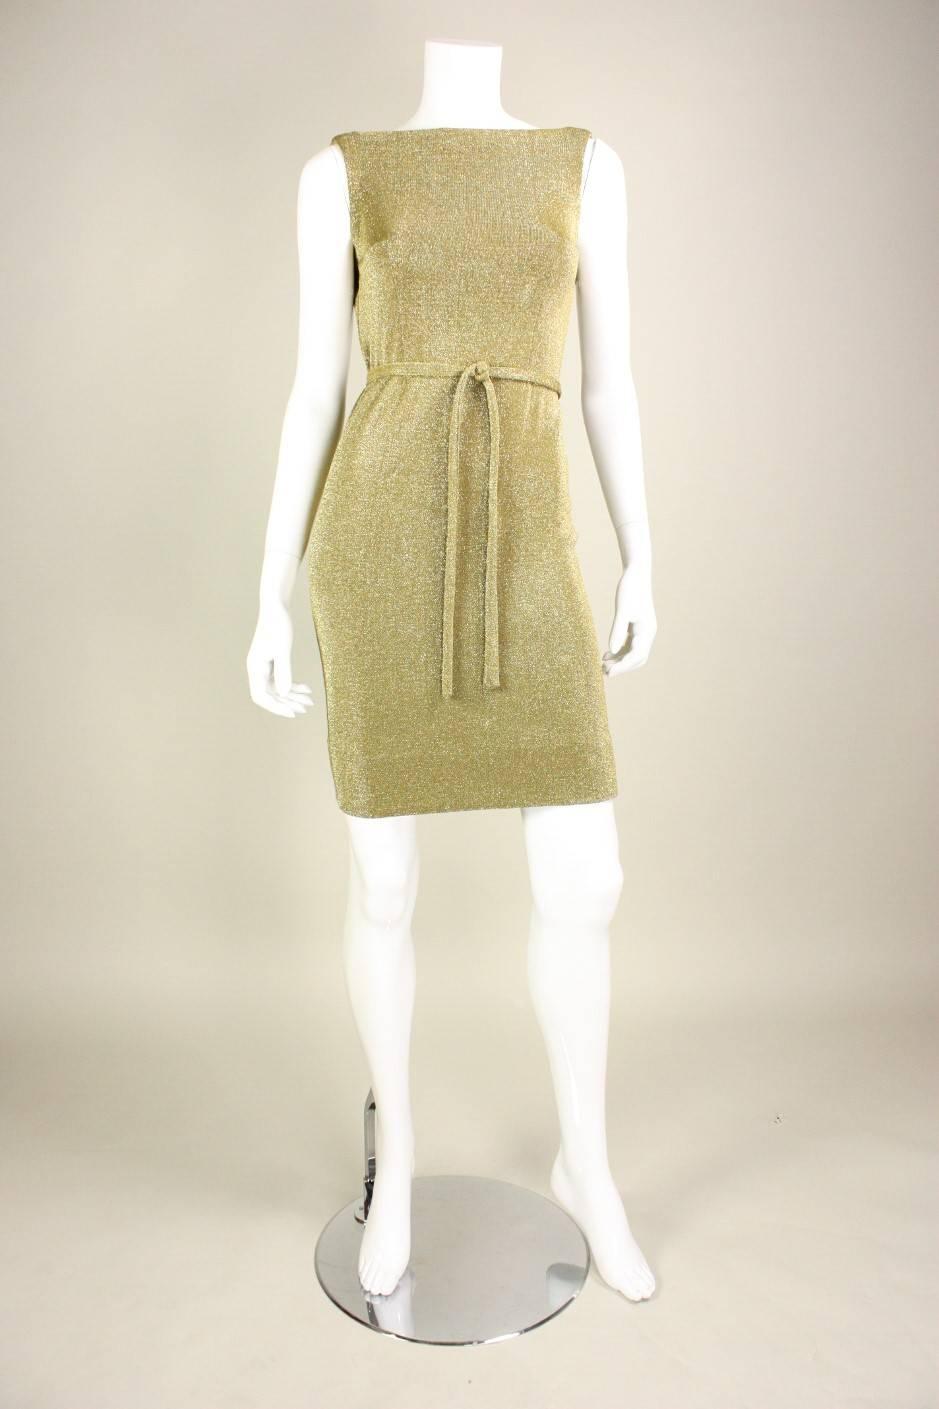 Vintage dress from Rudi Gernreich for Harmon Knitwear is made of gold stretchy metallic knit. Fitted throughout.  Detached belt. Unlined. No closures. 

Labeled vintage size 8.

Measurements-

Bust: 32-34